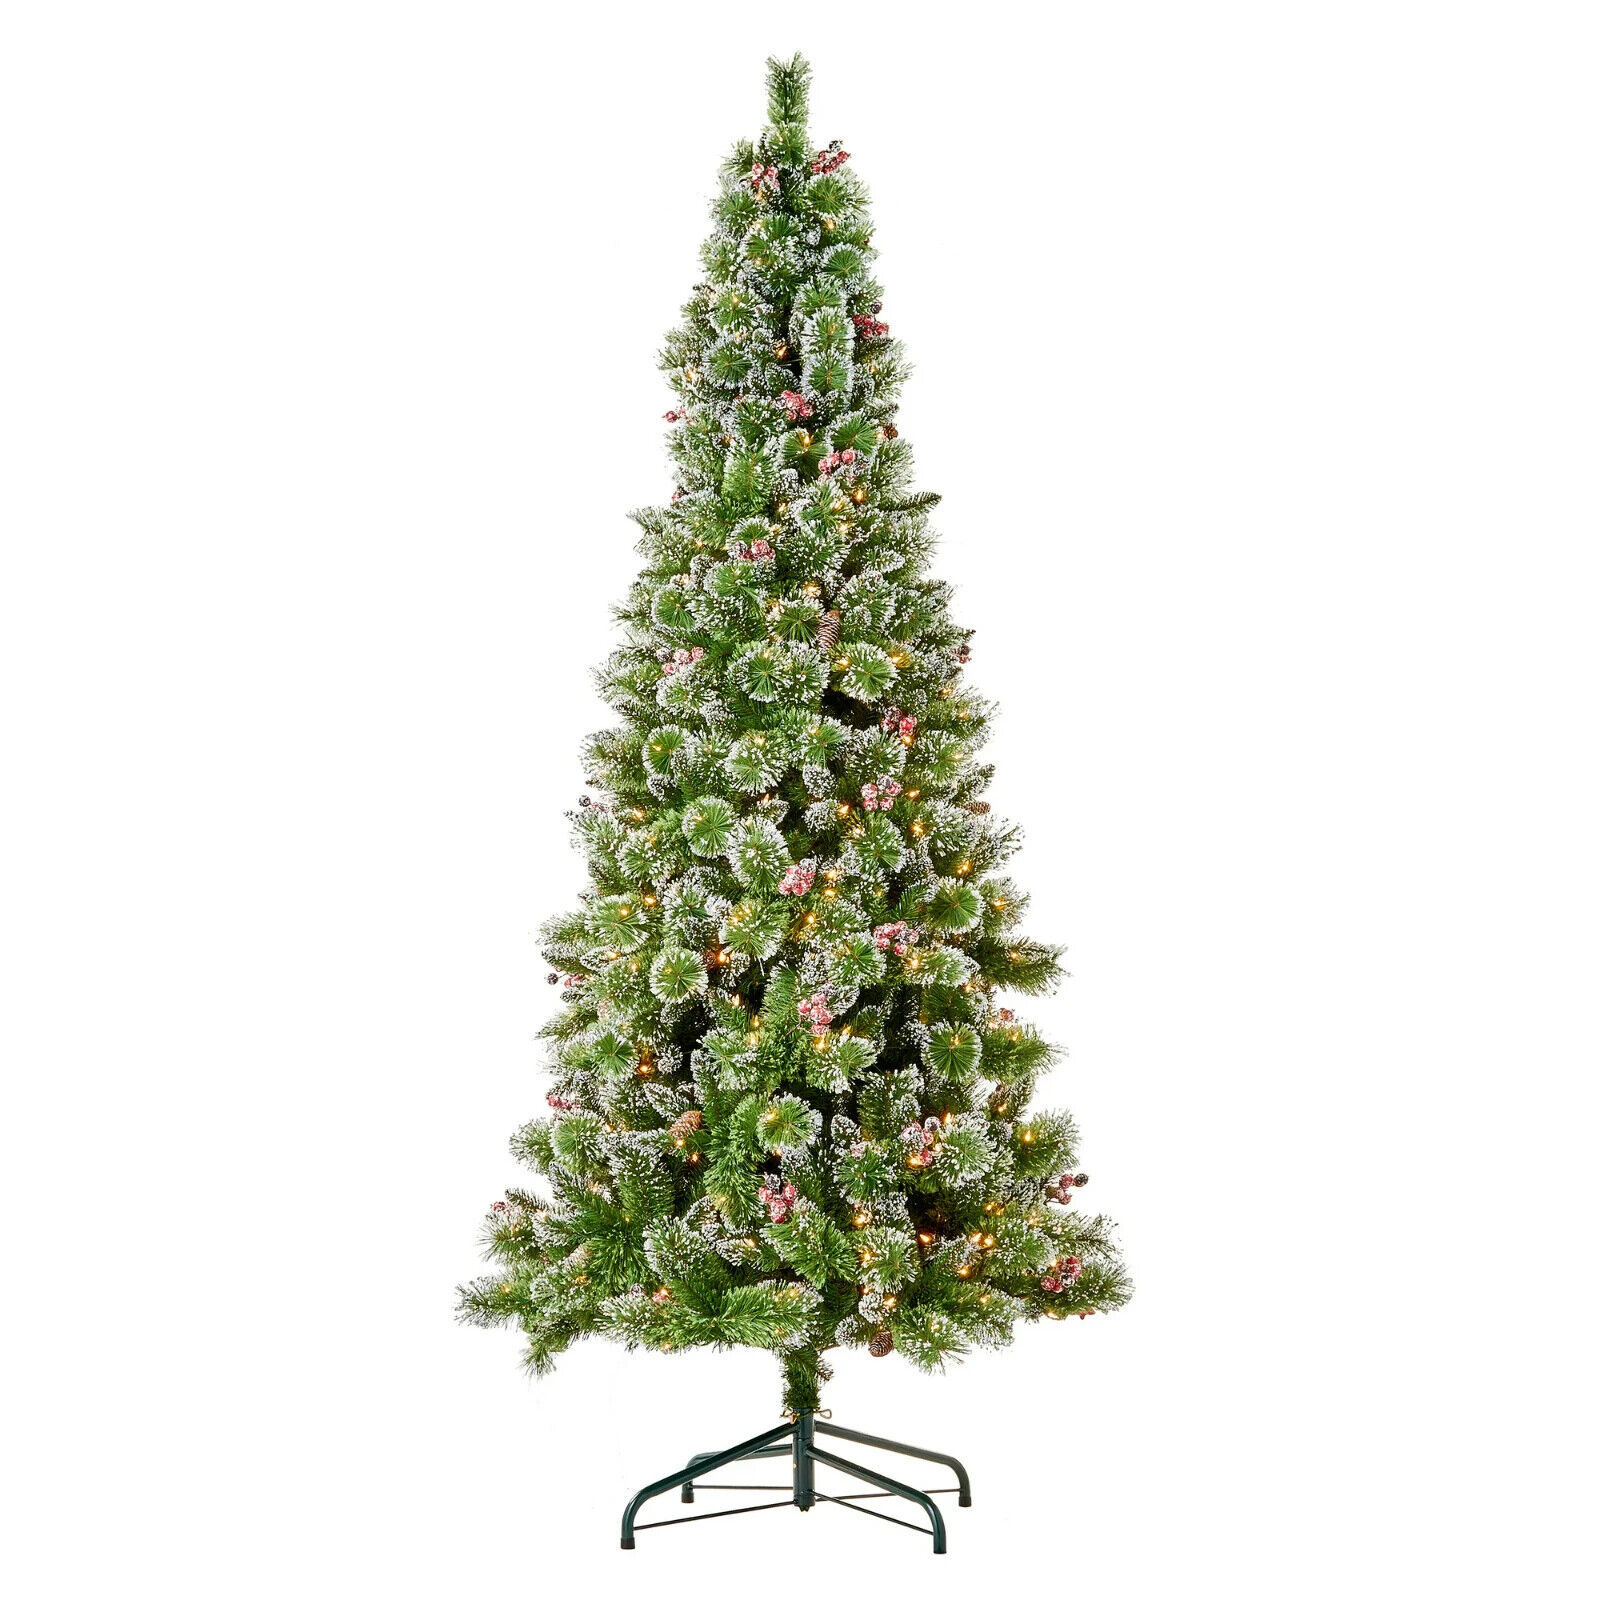 Primary image for 9' Glimmering Frost Artificial Christmas Tree